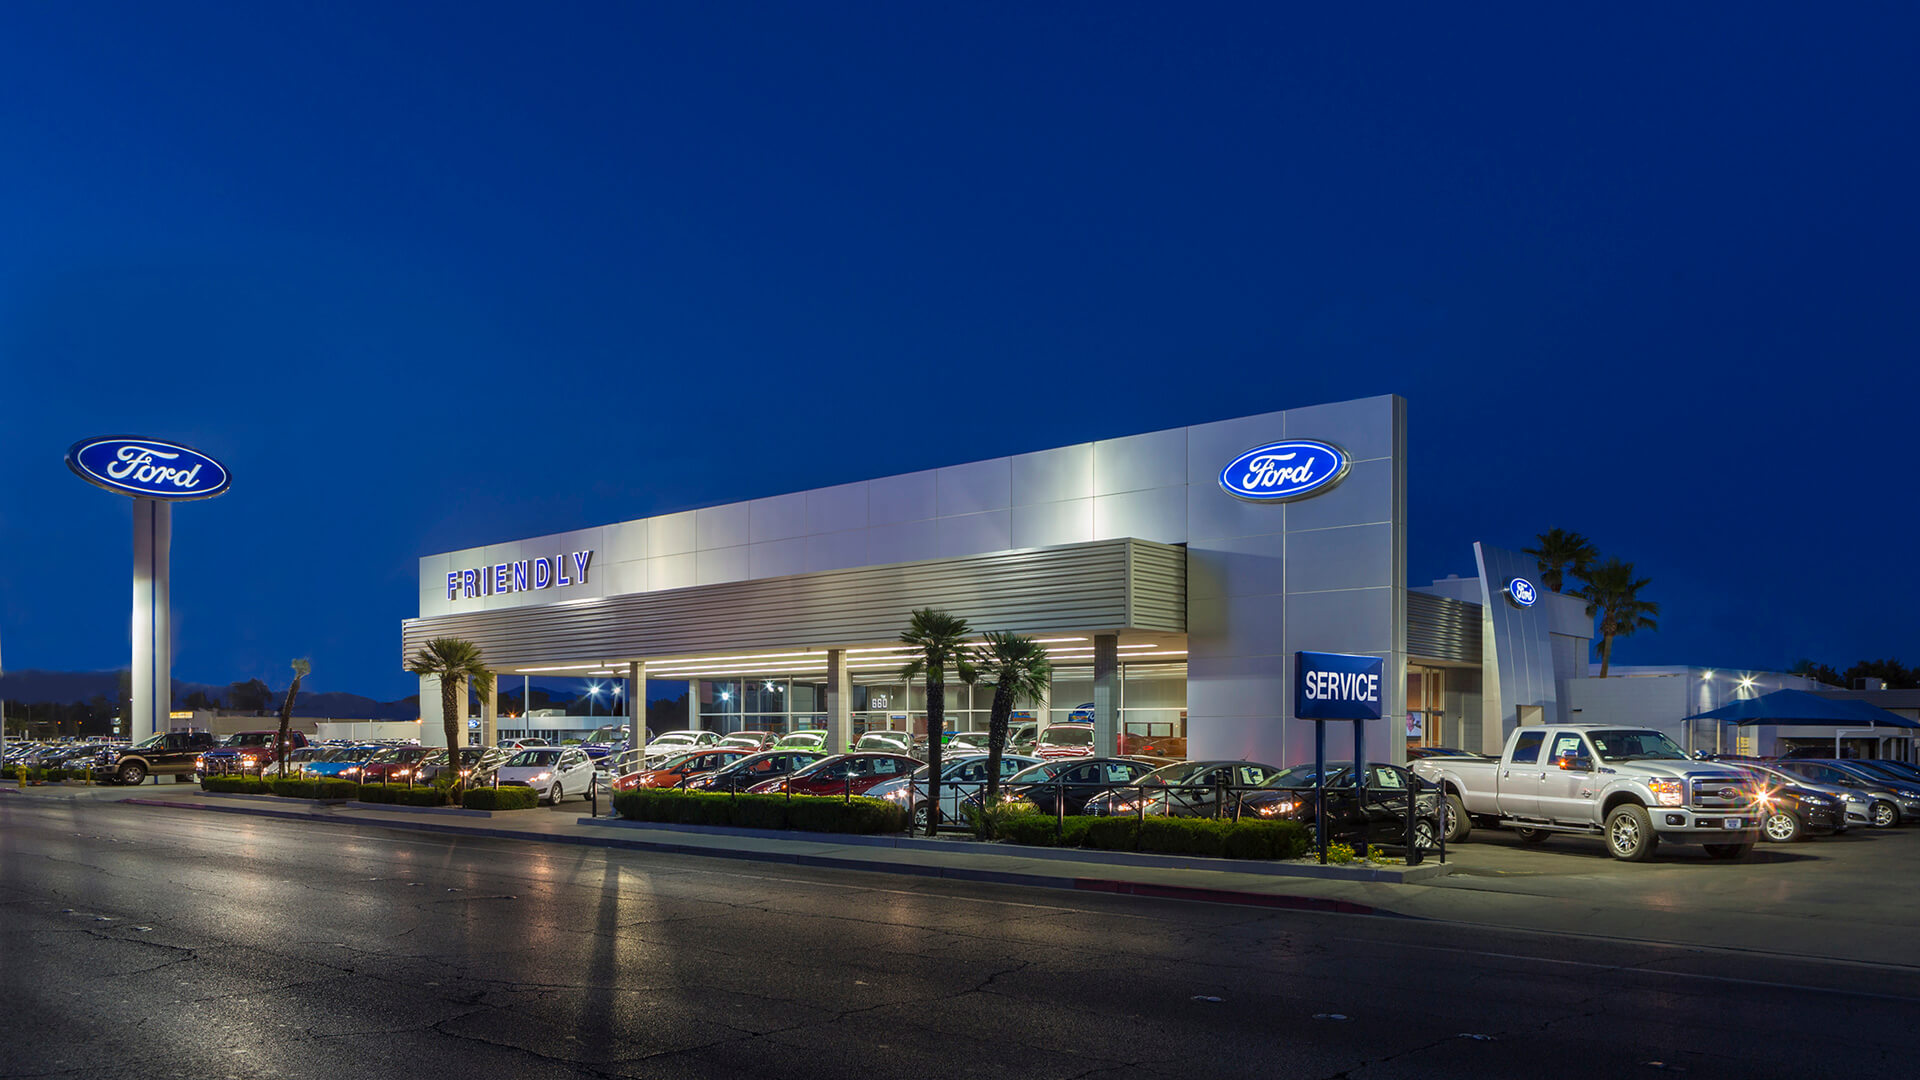 Friendly Ford Exterior remodel